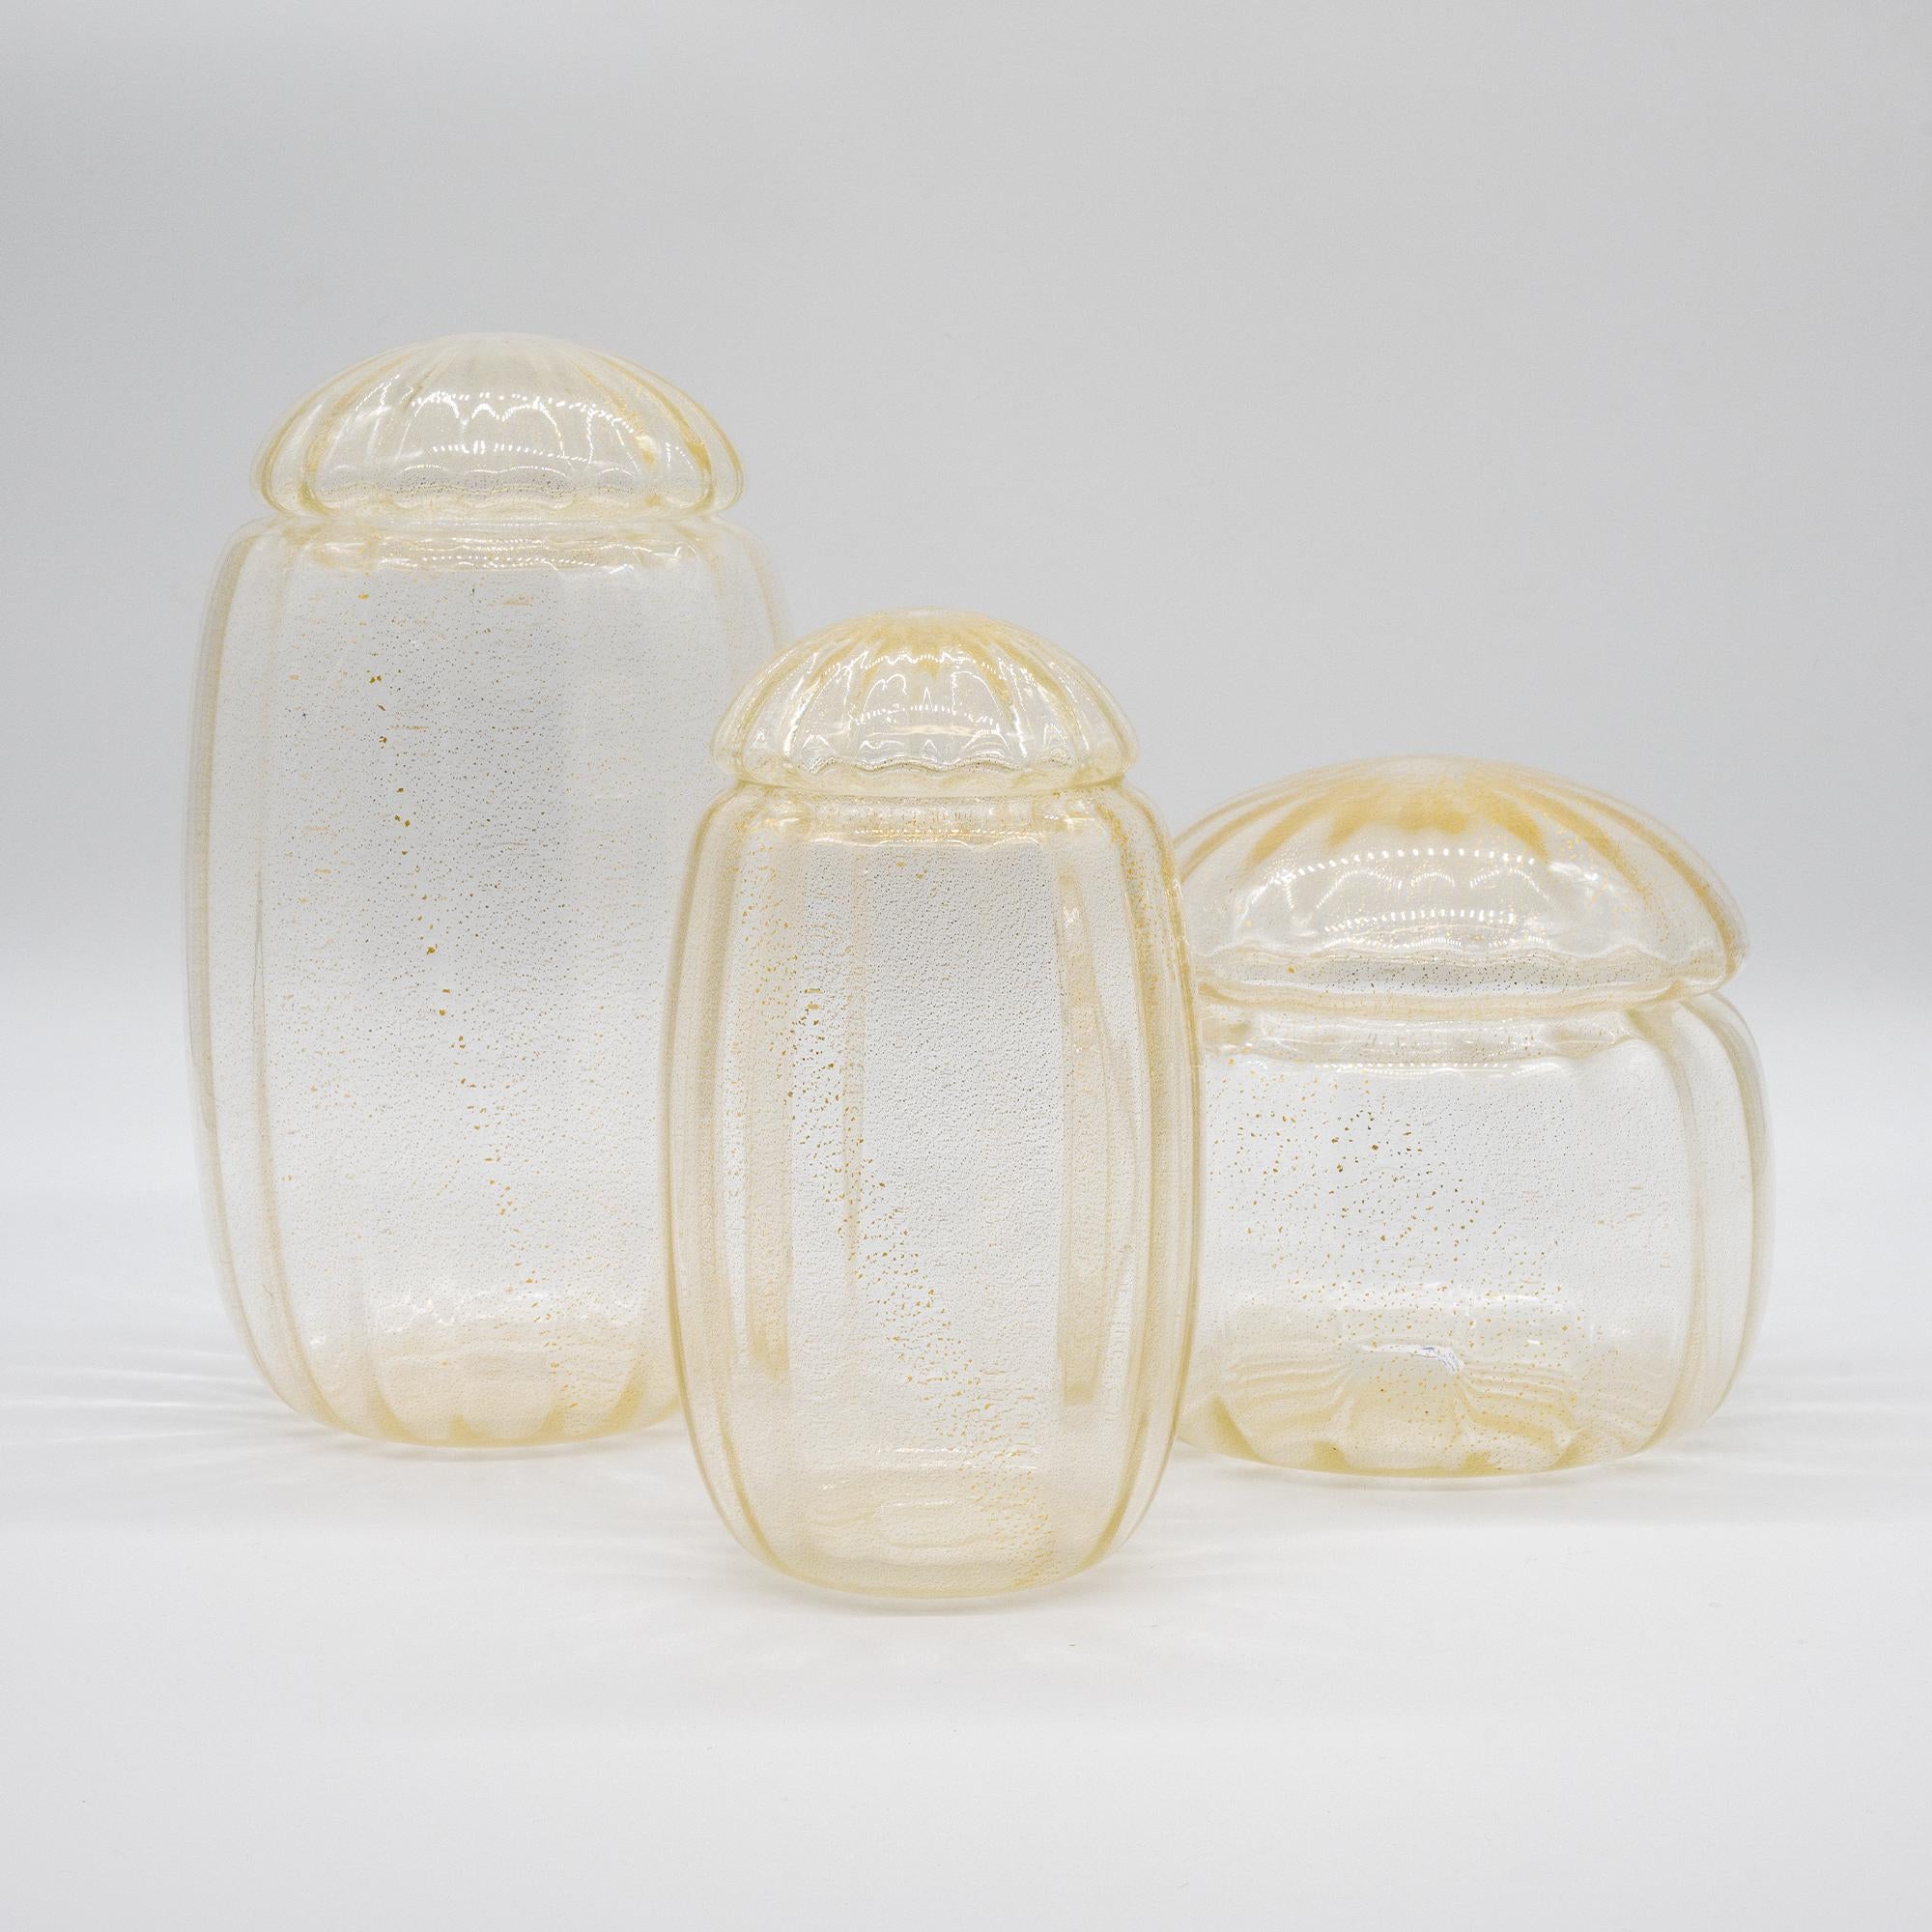 Murano glass potiches vase, mouth blown, in gold color.
Made in Murano and purchased directly from the manufacturer.

Set of 3 in different sizes, the big one is 18cm diameter and 20 cm height
Can be used to store small things in kitchen

All